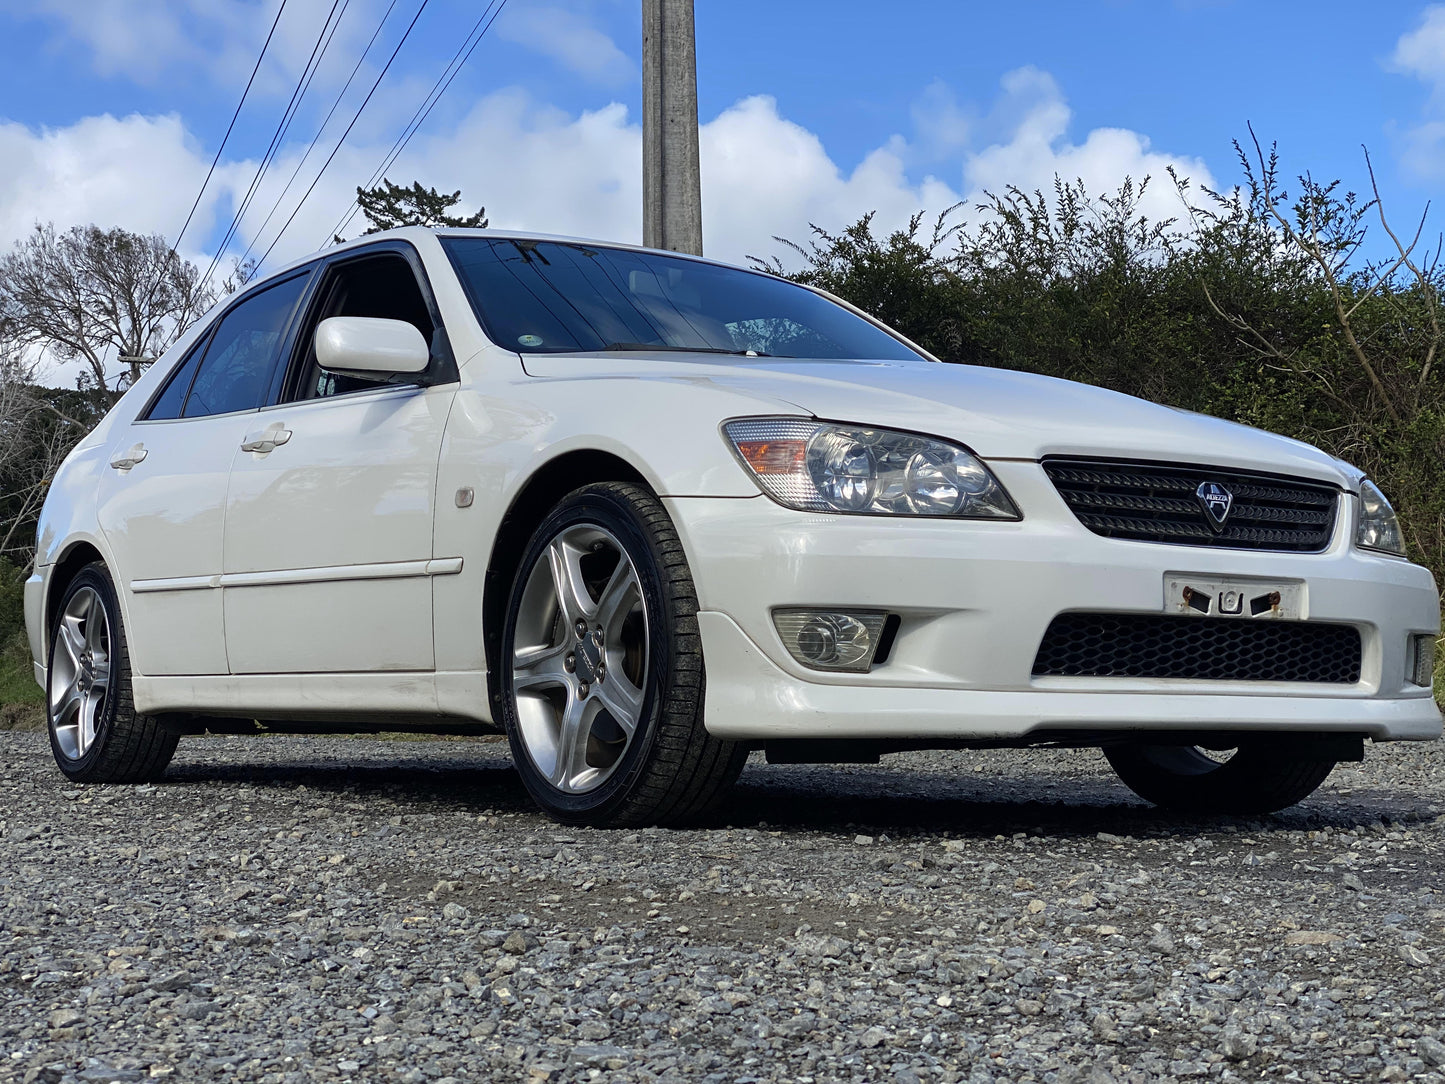 Toyota Altezza 2001 RS200 - Manual